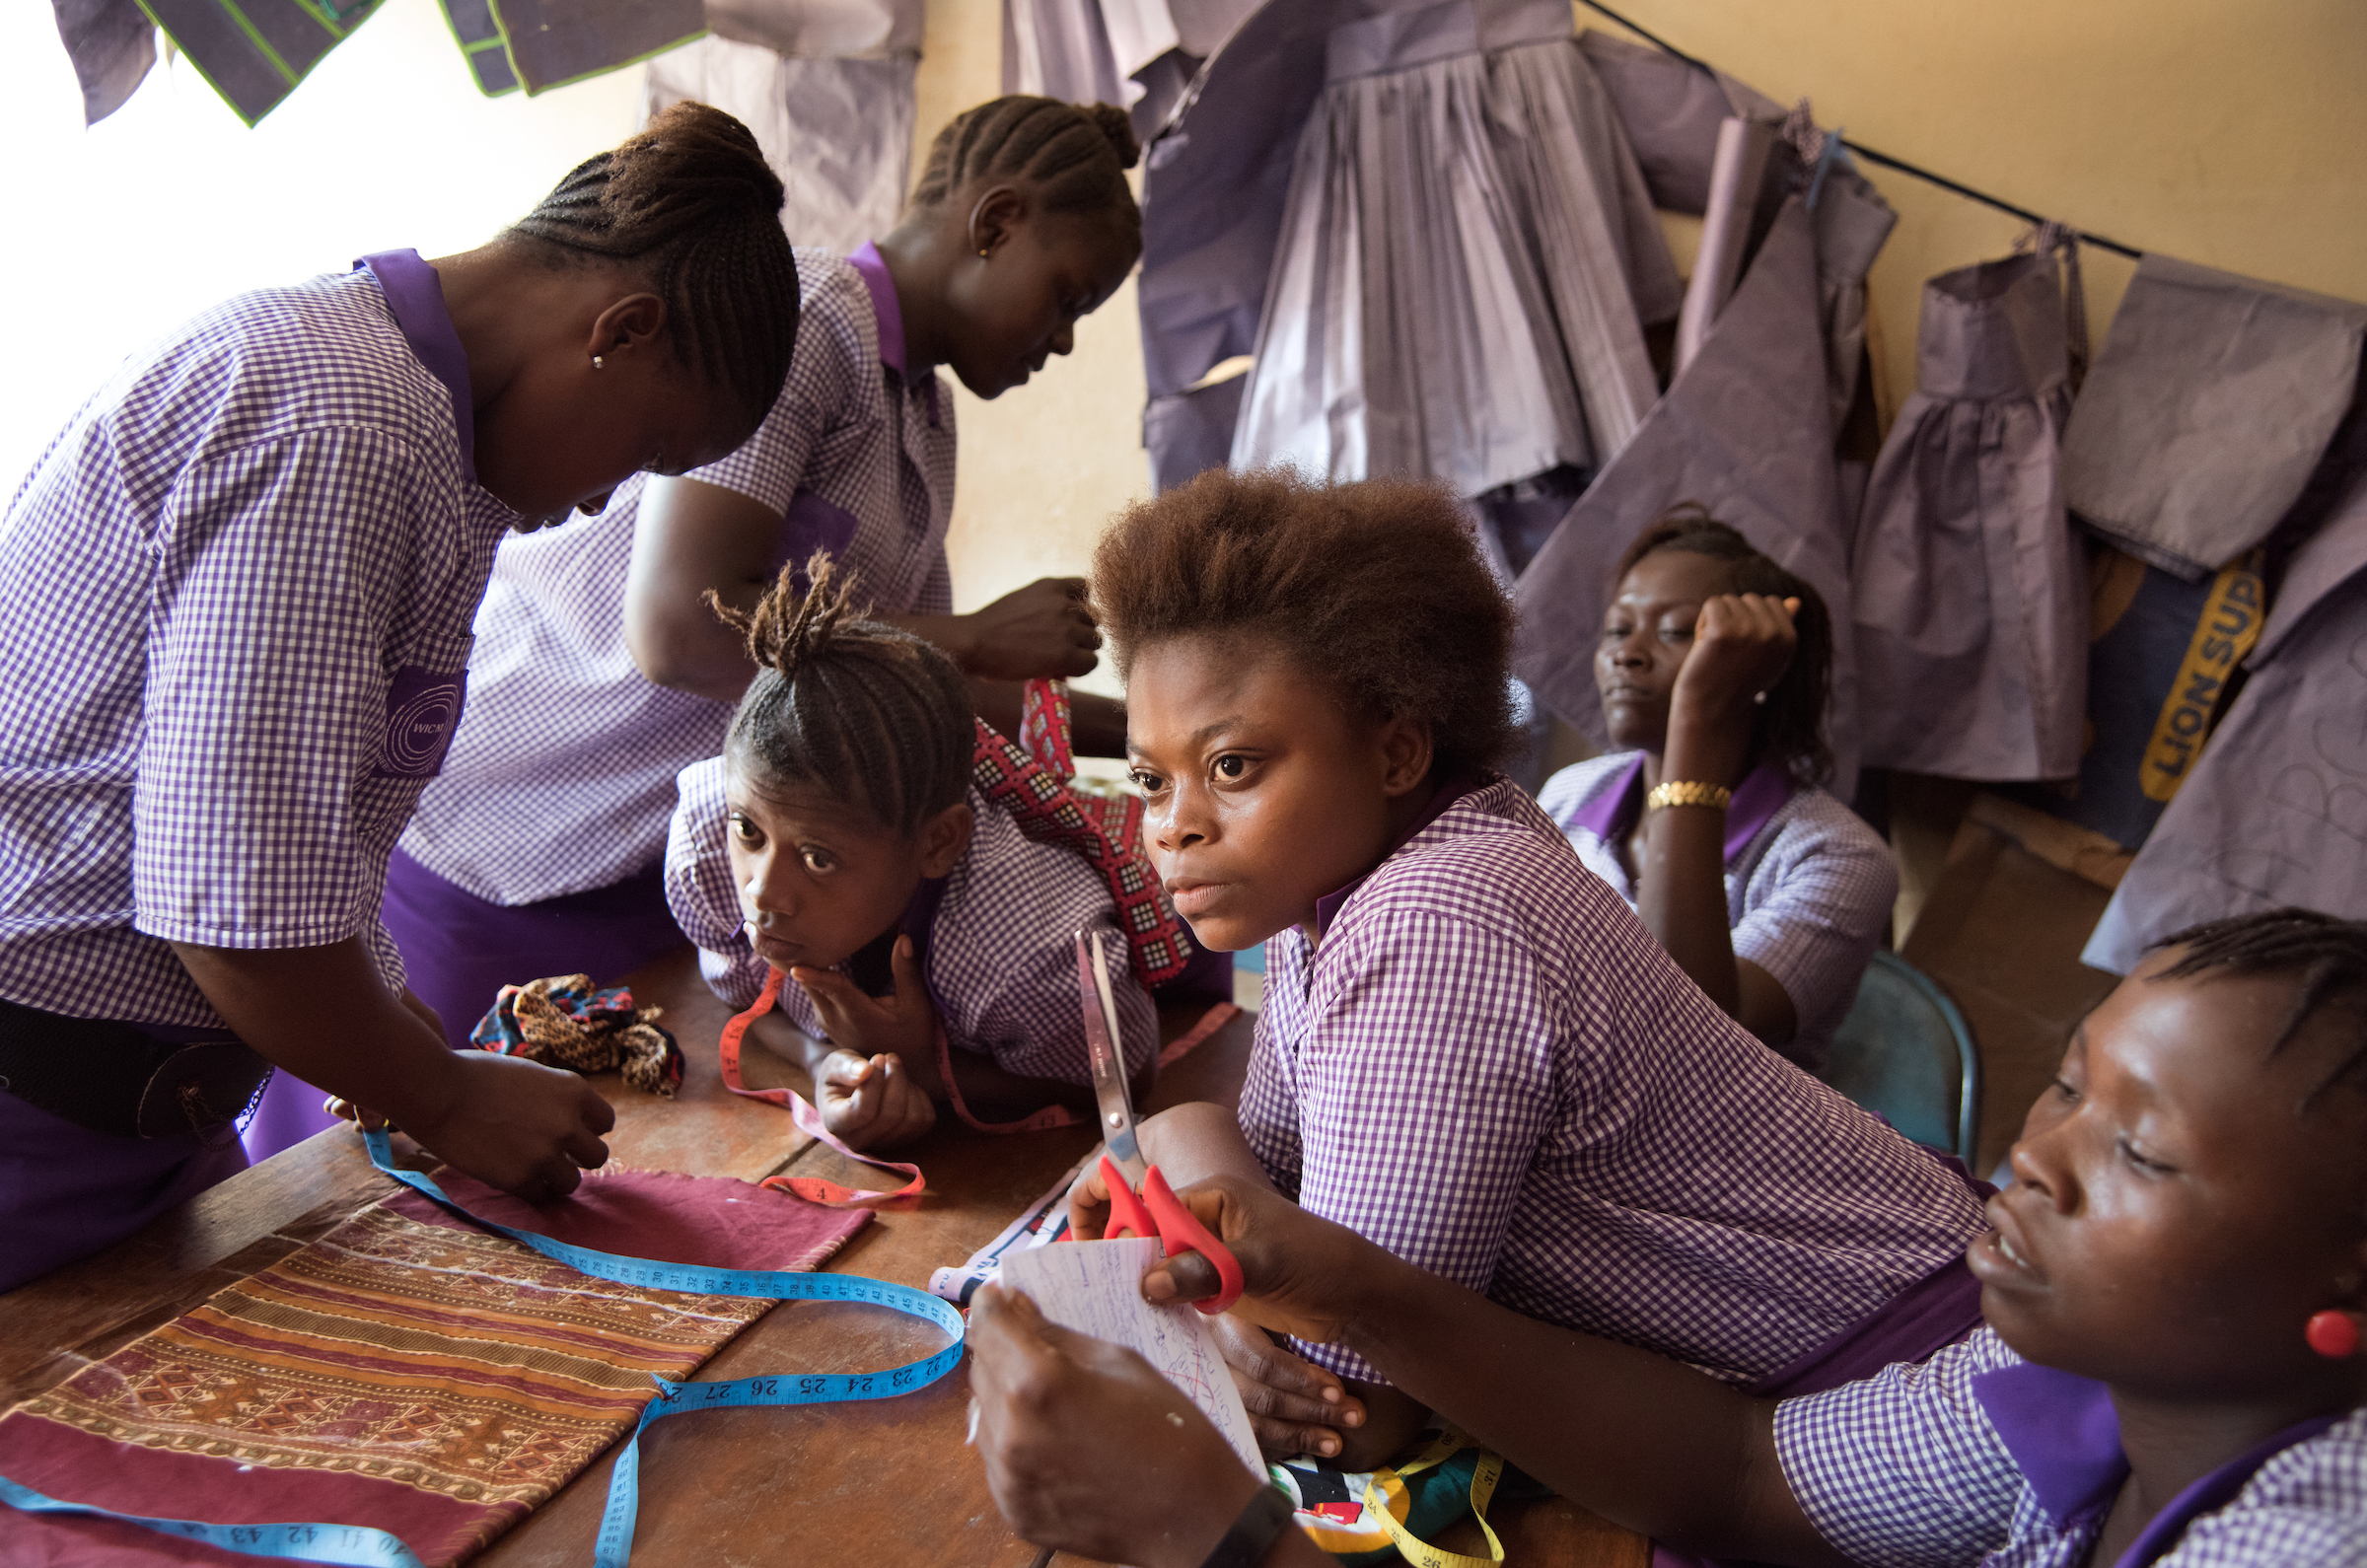 Adolescent girls take part in sewing classes offered by Women in Crisis in Freetown, Sierra Leone.